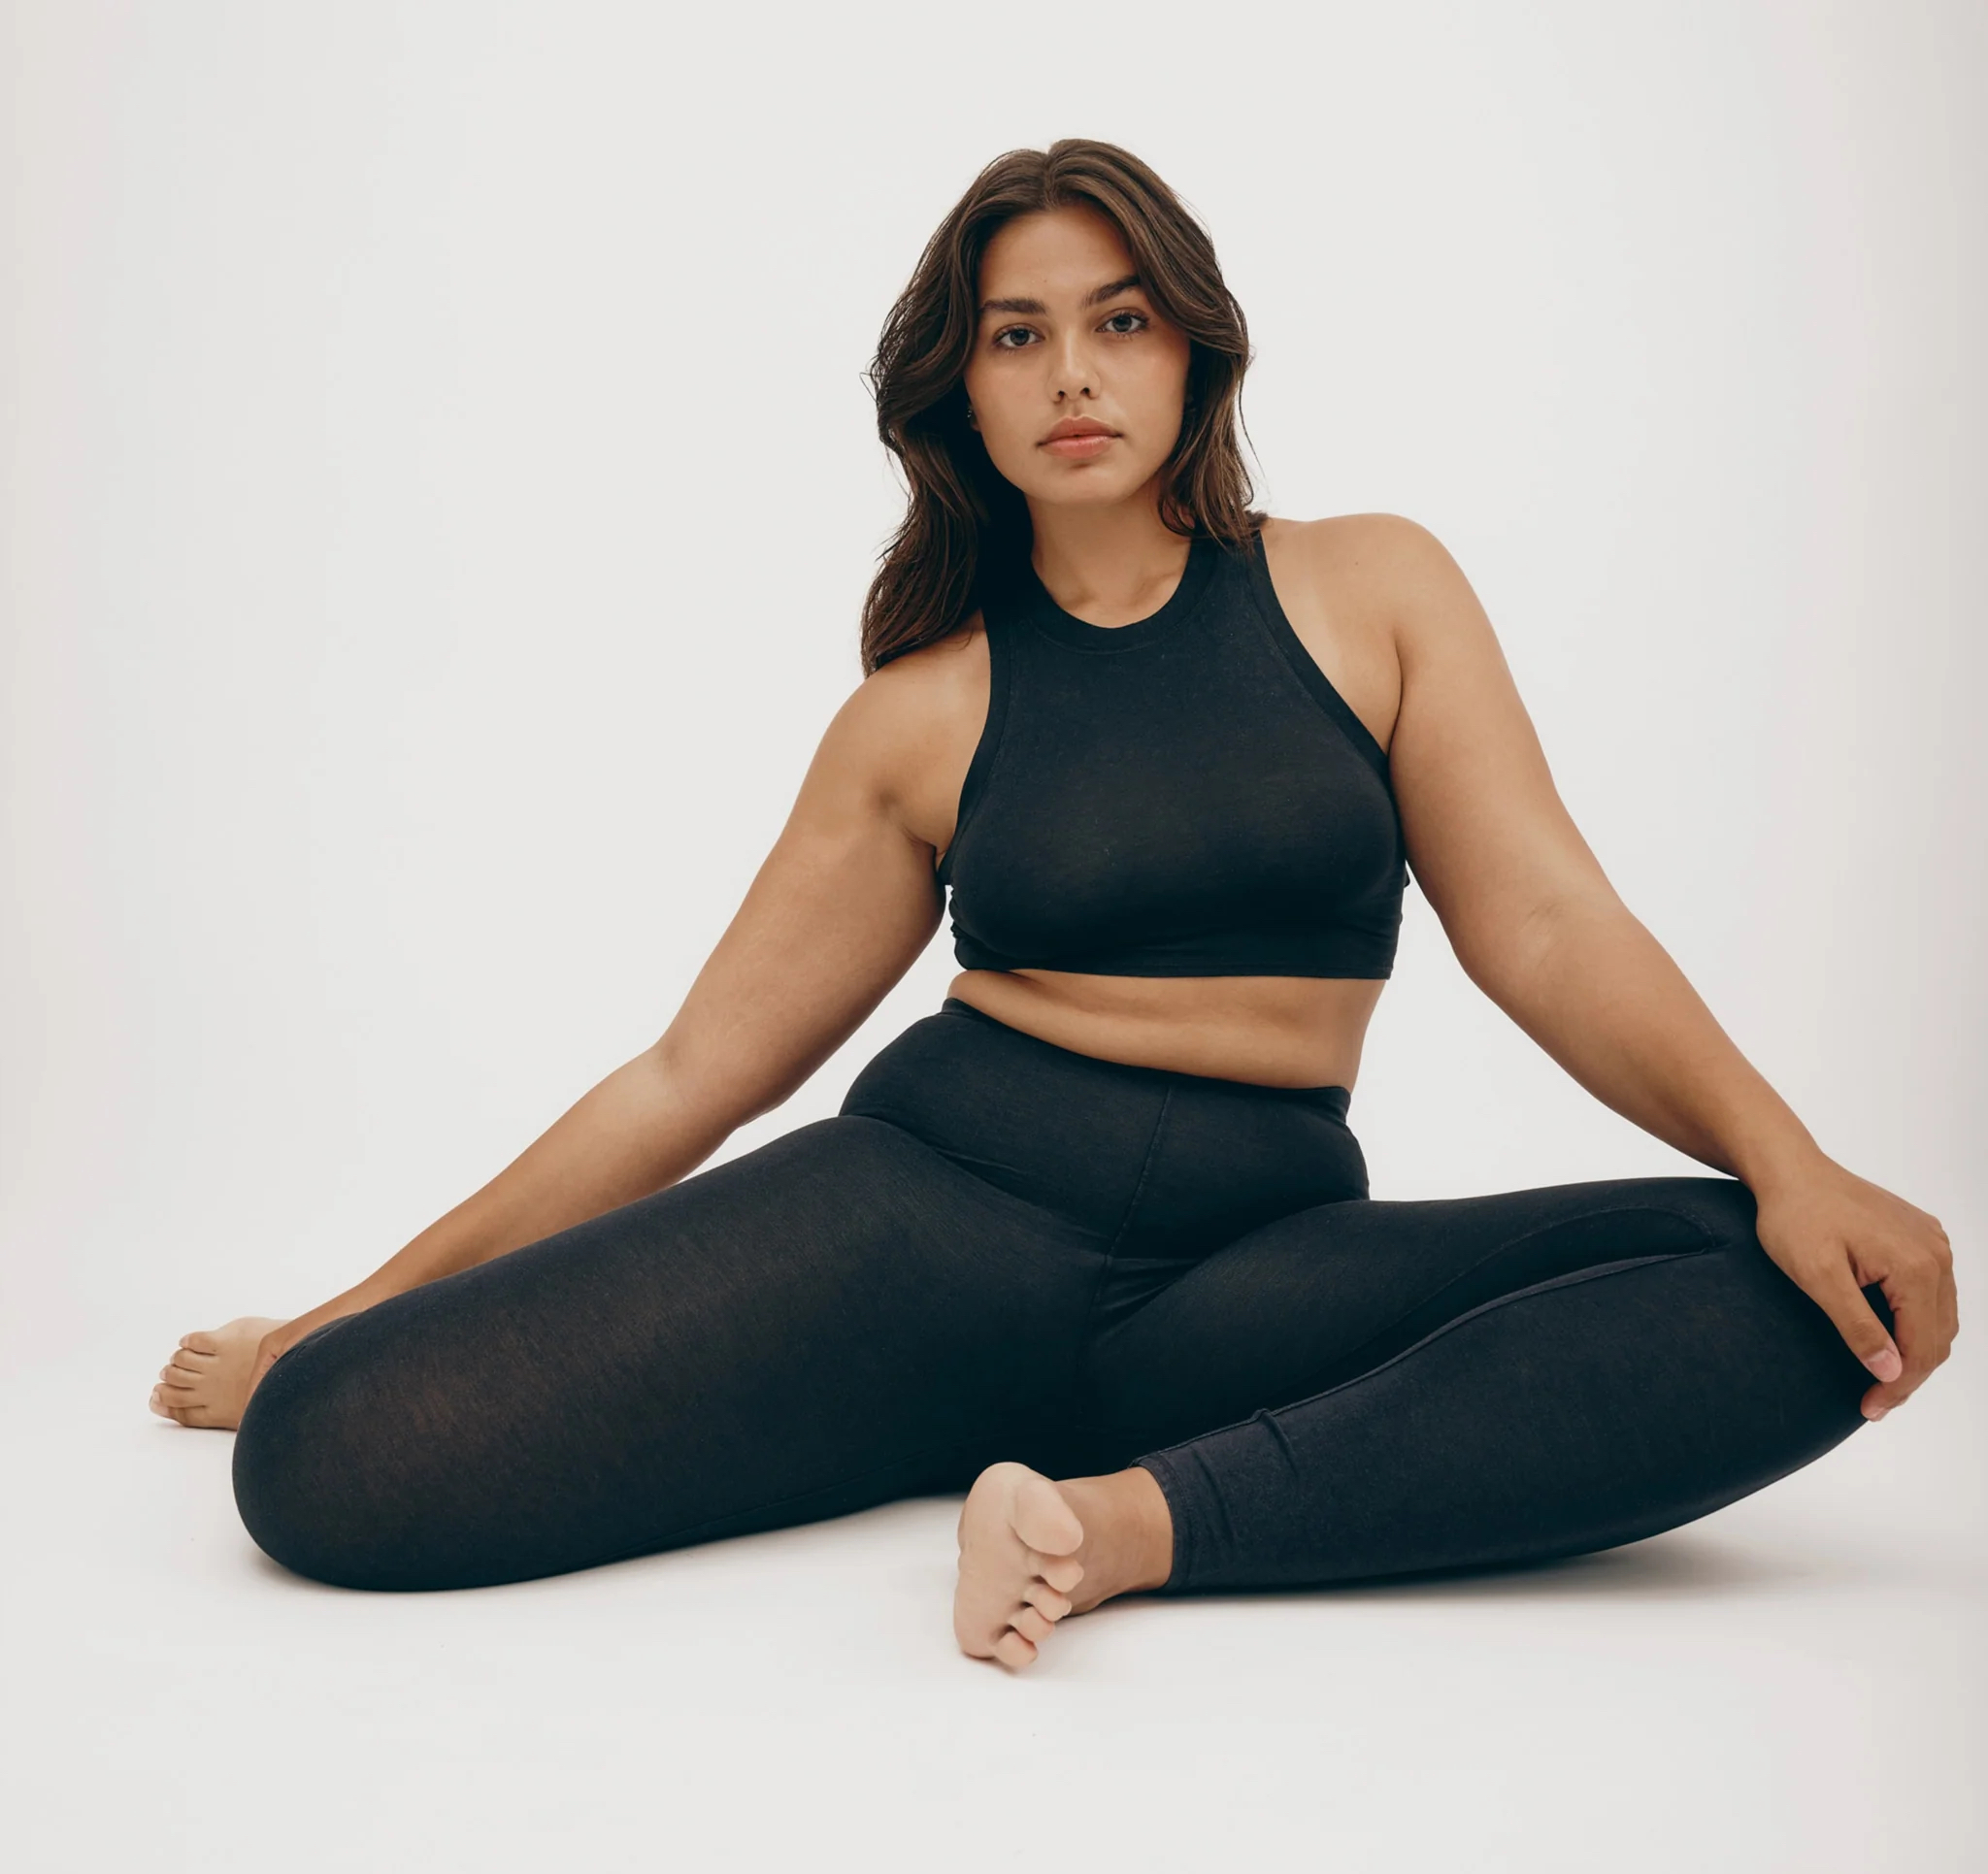 sex xxl yoga pants, sex xxl yoga pants Suppliers and Manufacturers at